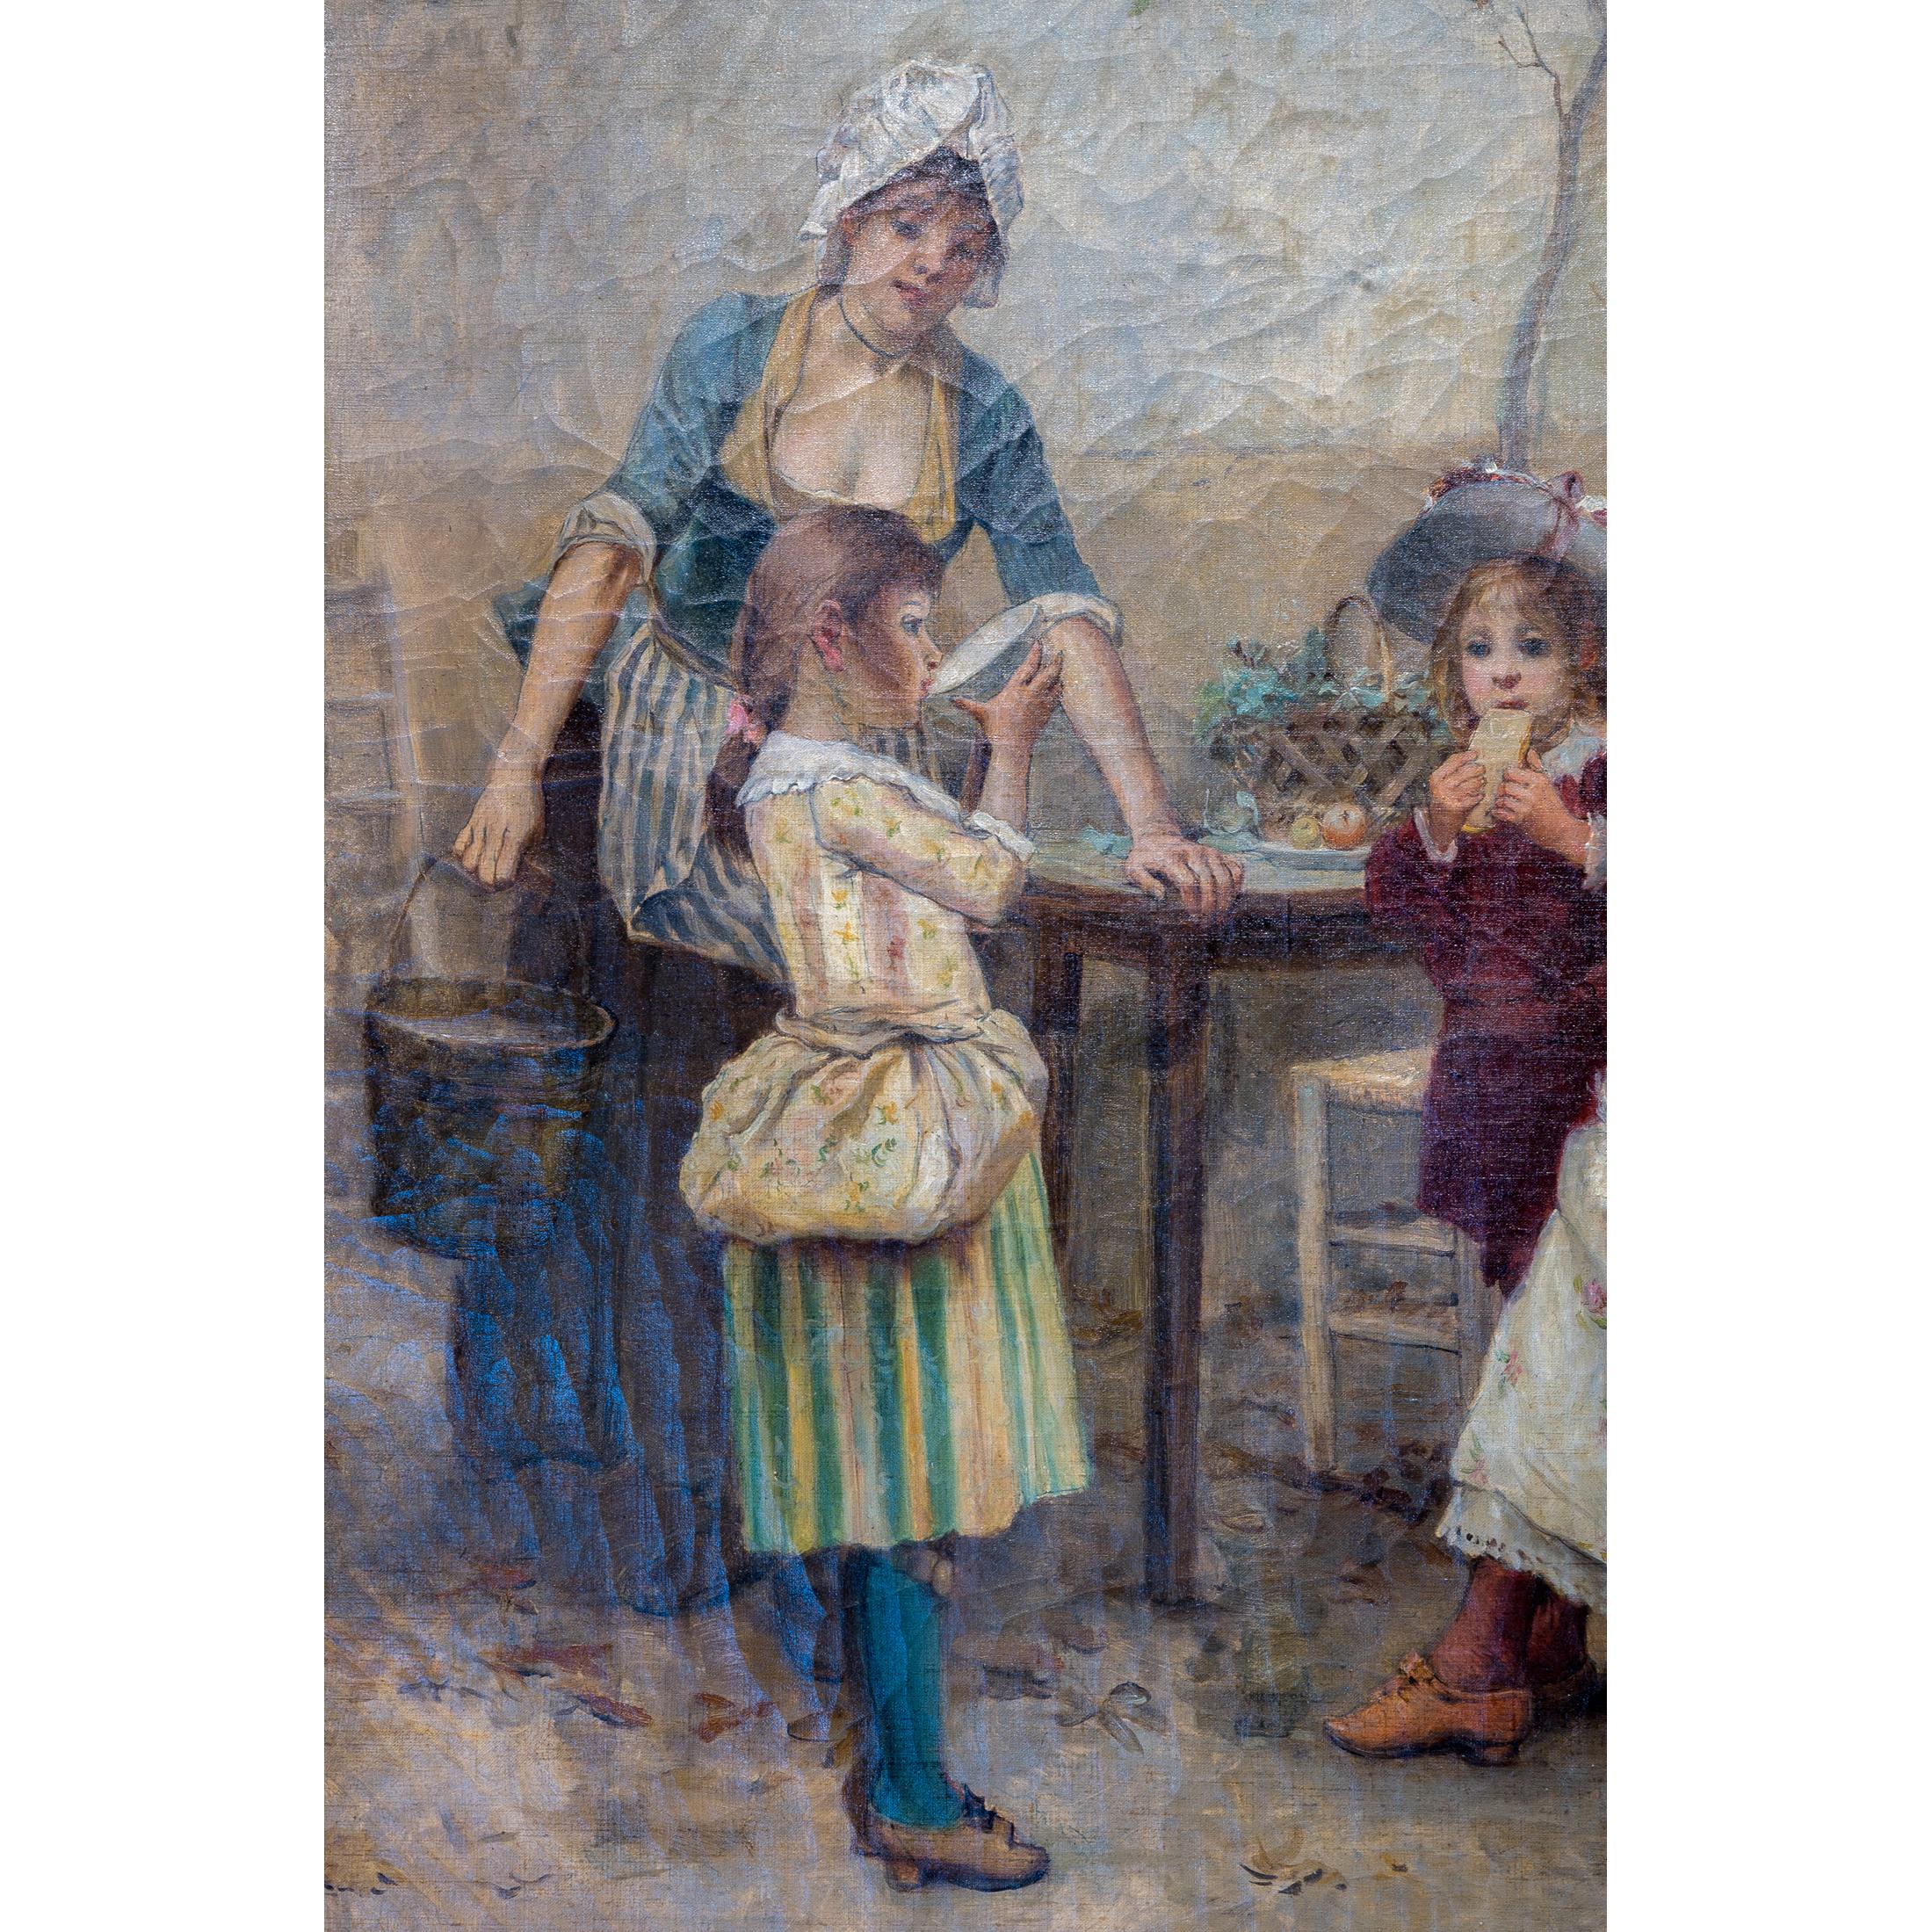 A Fine Painting of Women and Children by Émile Auguste Pinchart 1